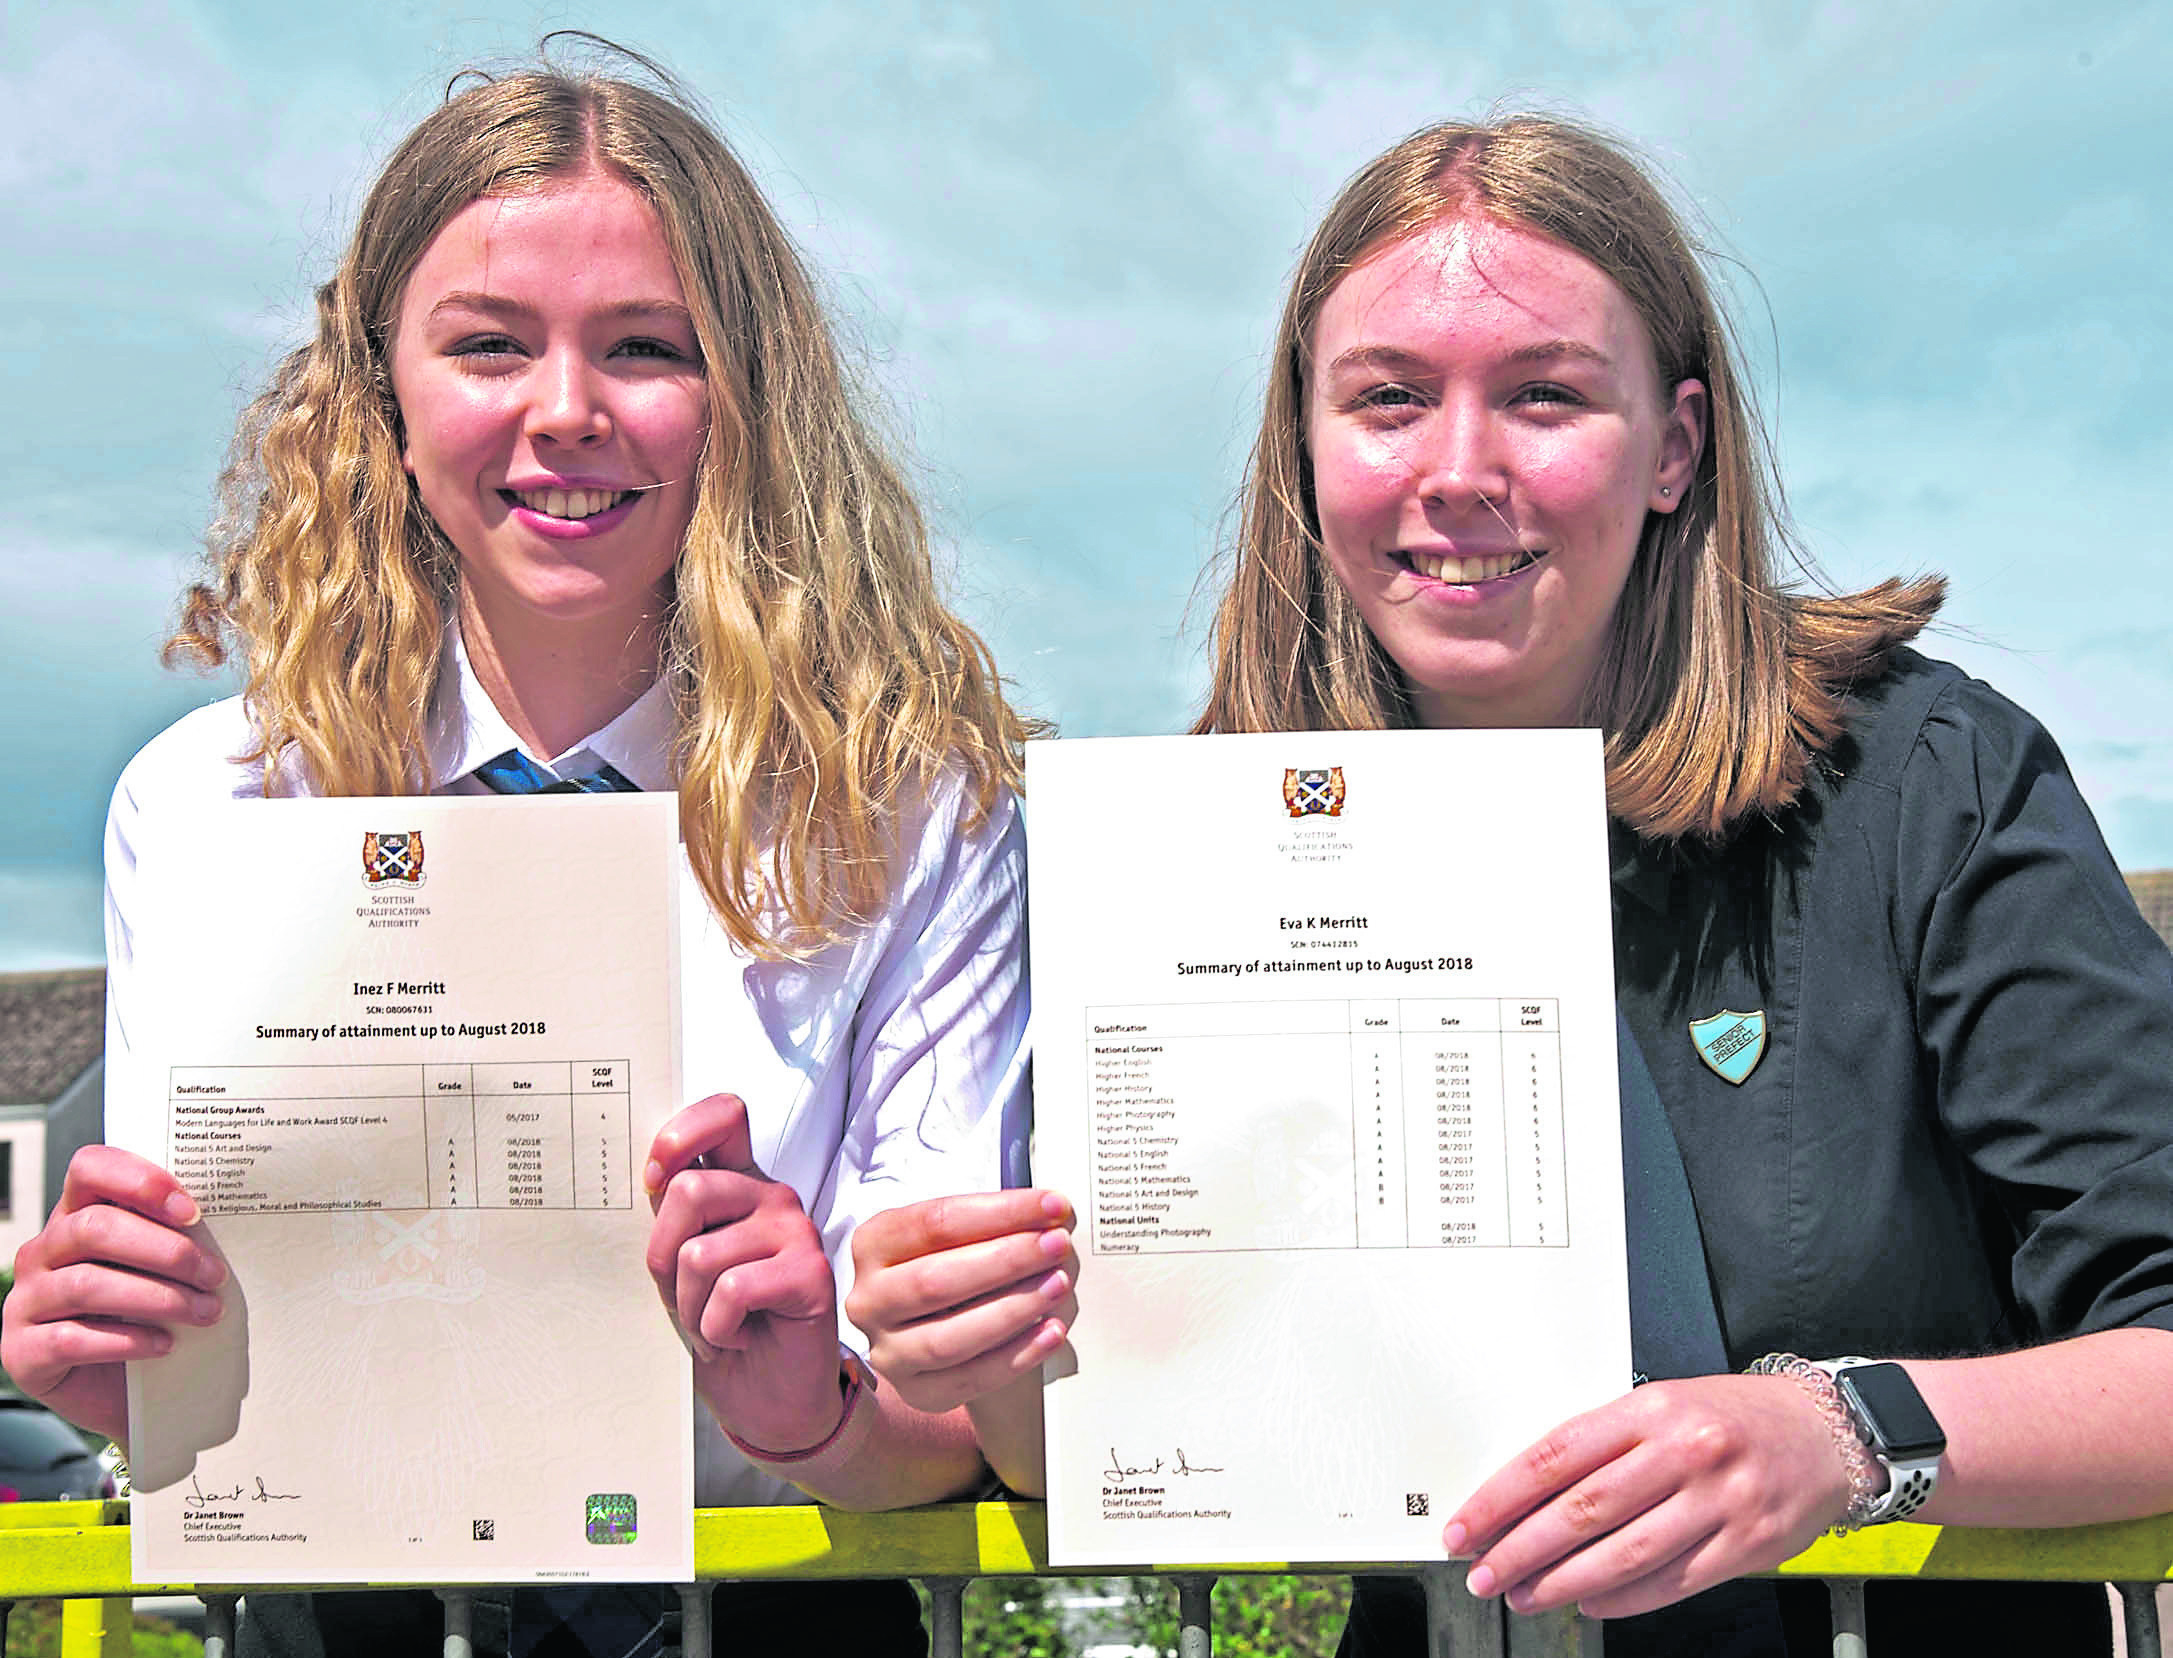 Nairn Academy Exam Results 7.8.2018
Sisters Inez (15)(left) and Eva Merritt (17) with their results.